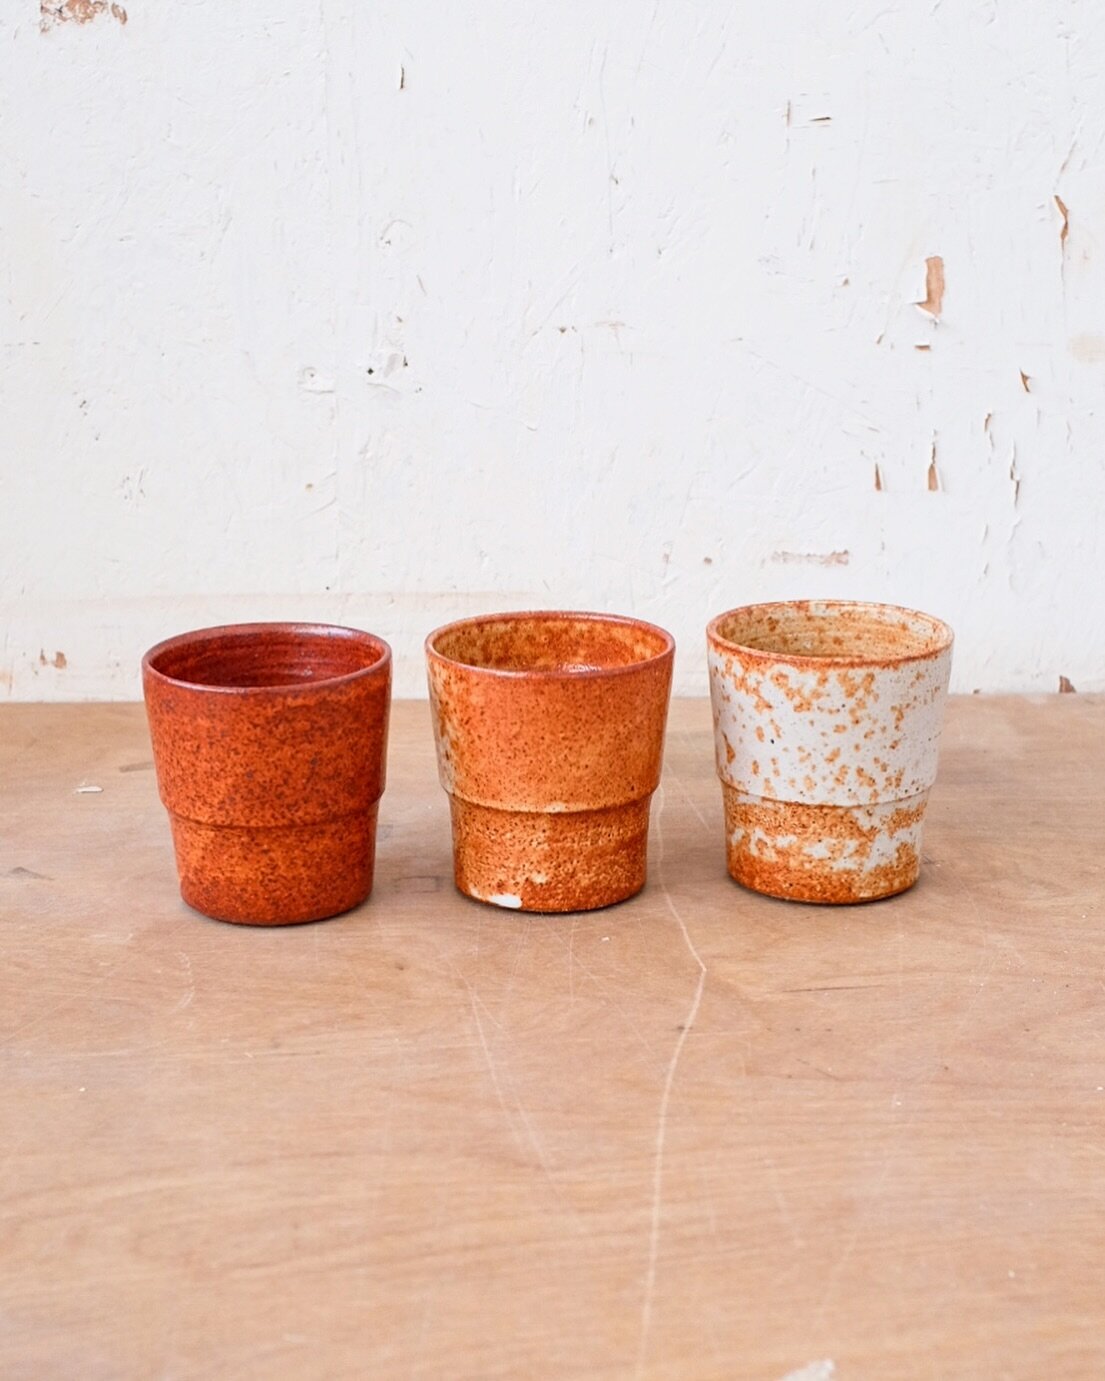 Here are three cups fired in the same glaze in the same kiln. With gas firing, you&rsquo;re not only dealing with fluctuations in temperature but also different levels of reduction. So here, the left cup had a lot of reduction and was probably in a h